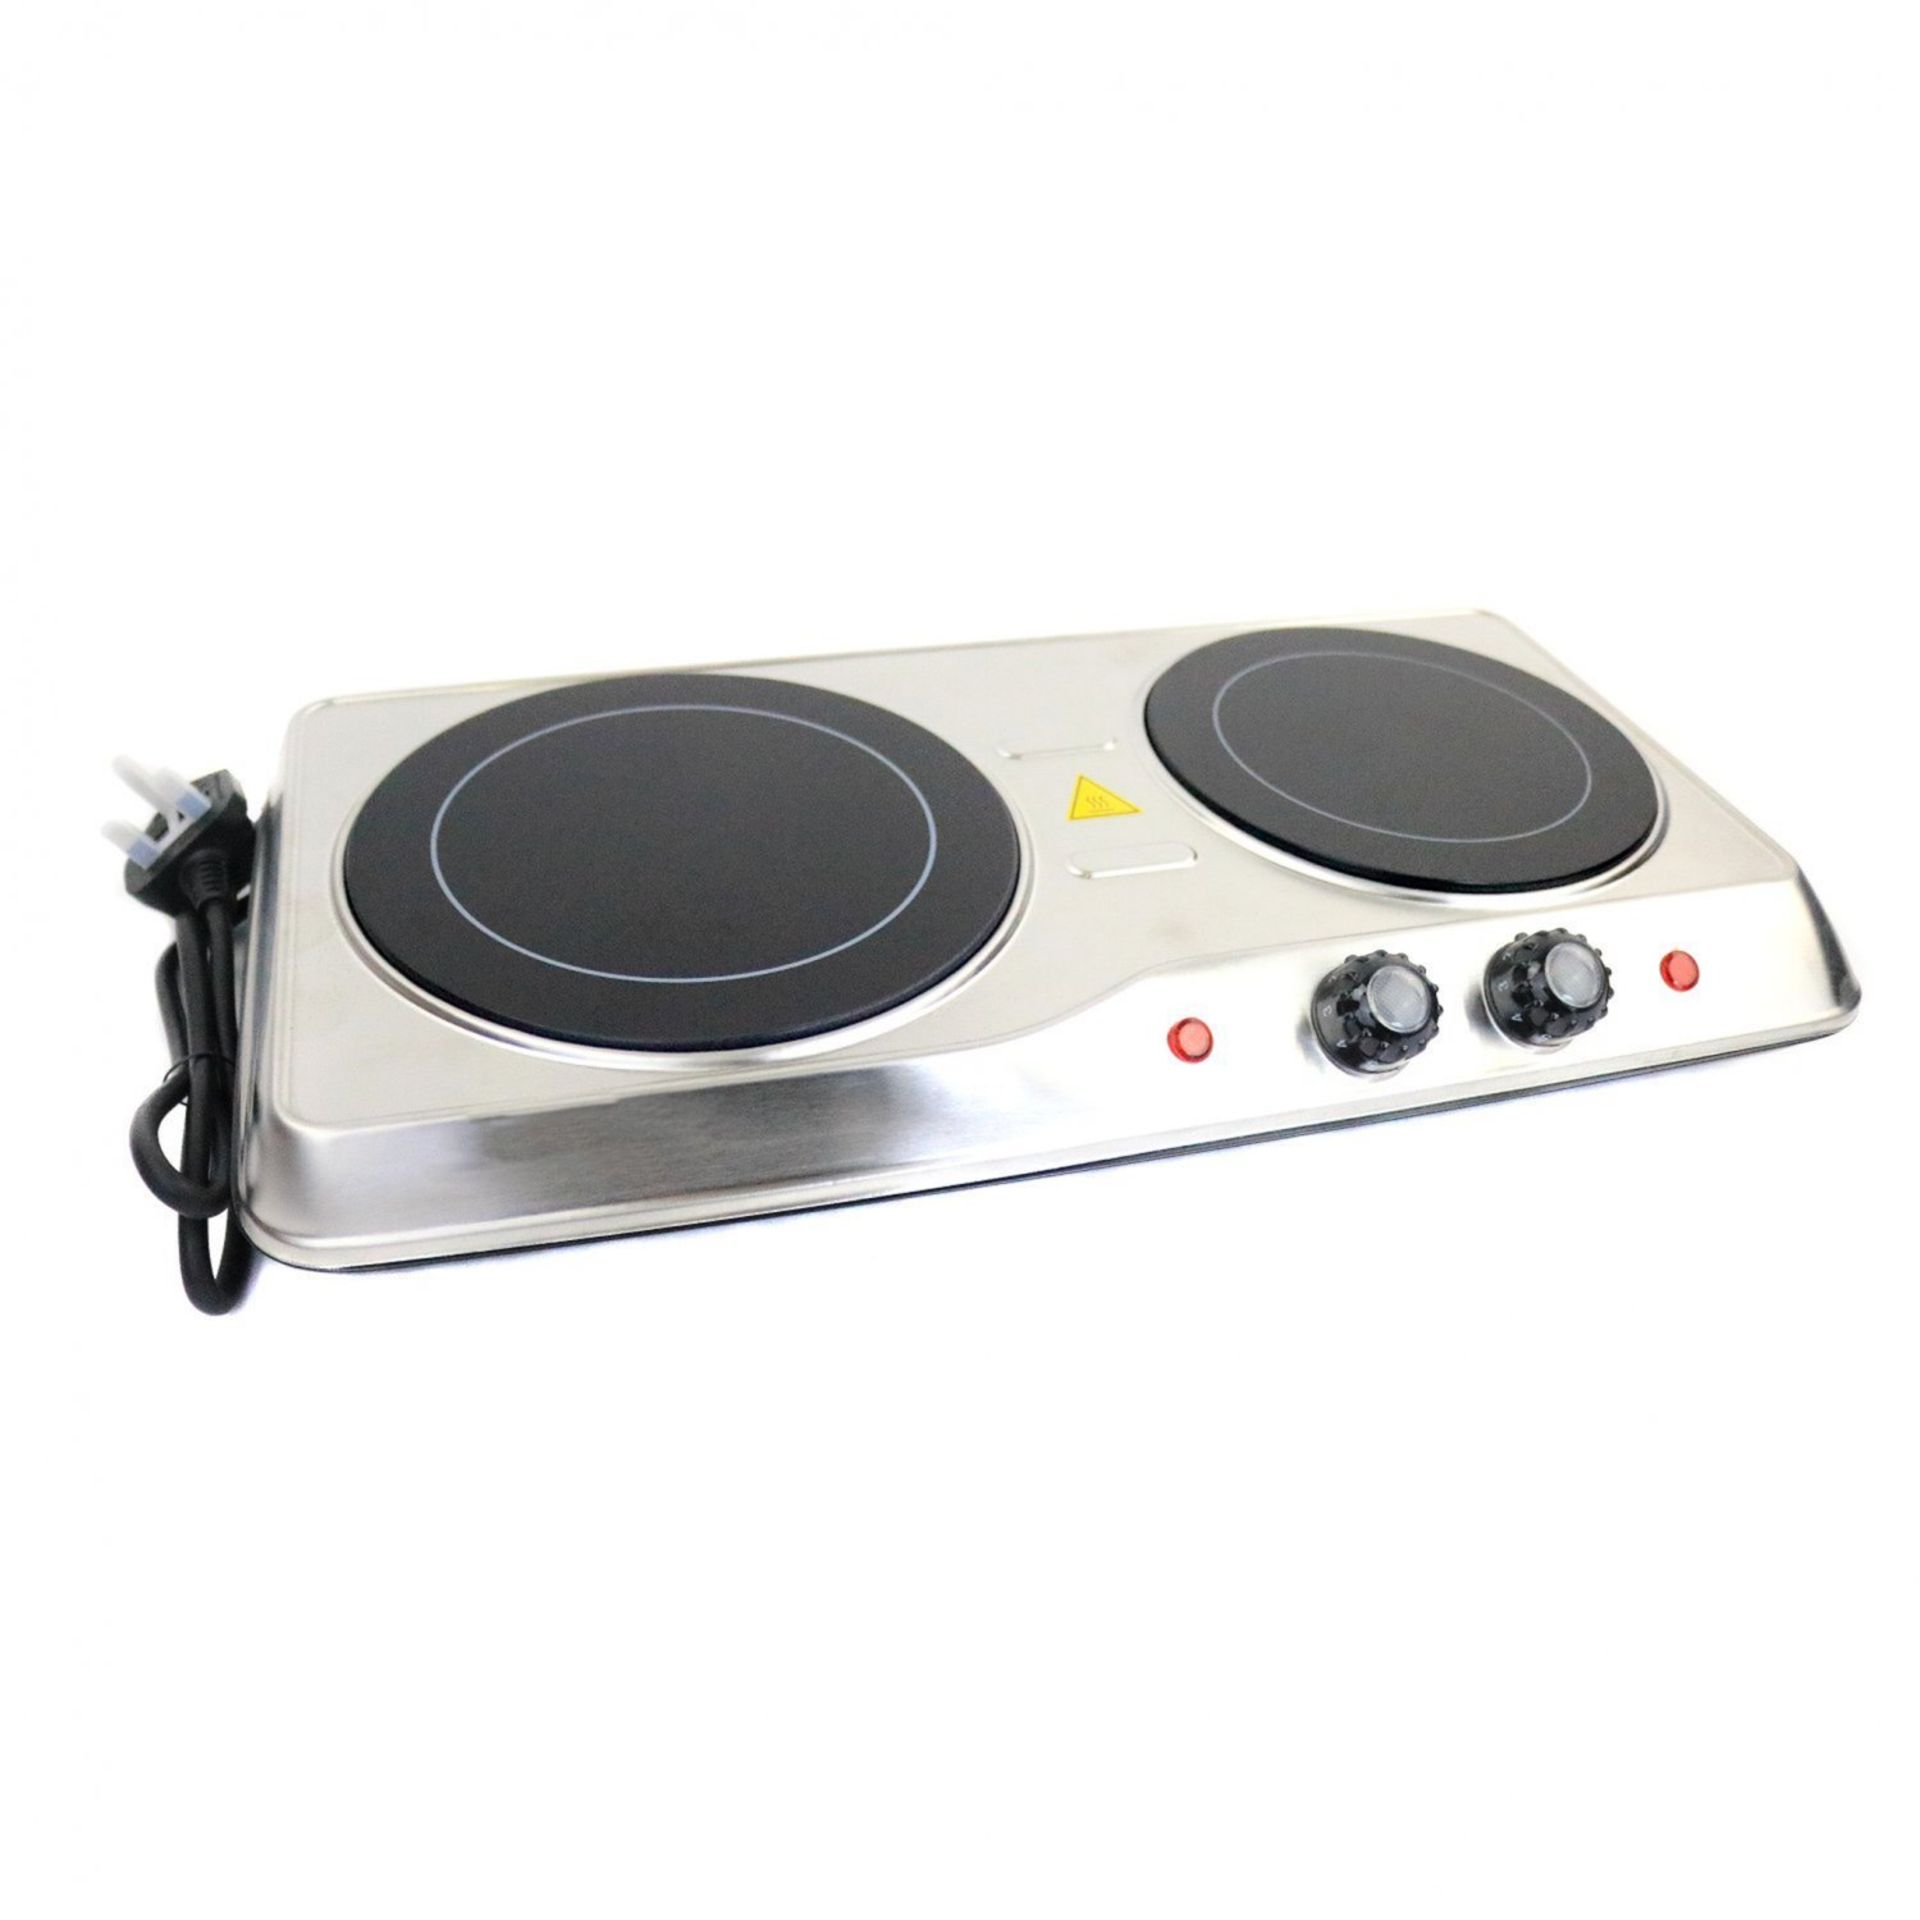 (D27) 2000W Ceramic Portable Infrared Electric Double Hot Plate Hob Total Power: 2000W - Large... - Image 2 of 3